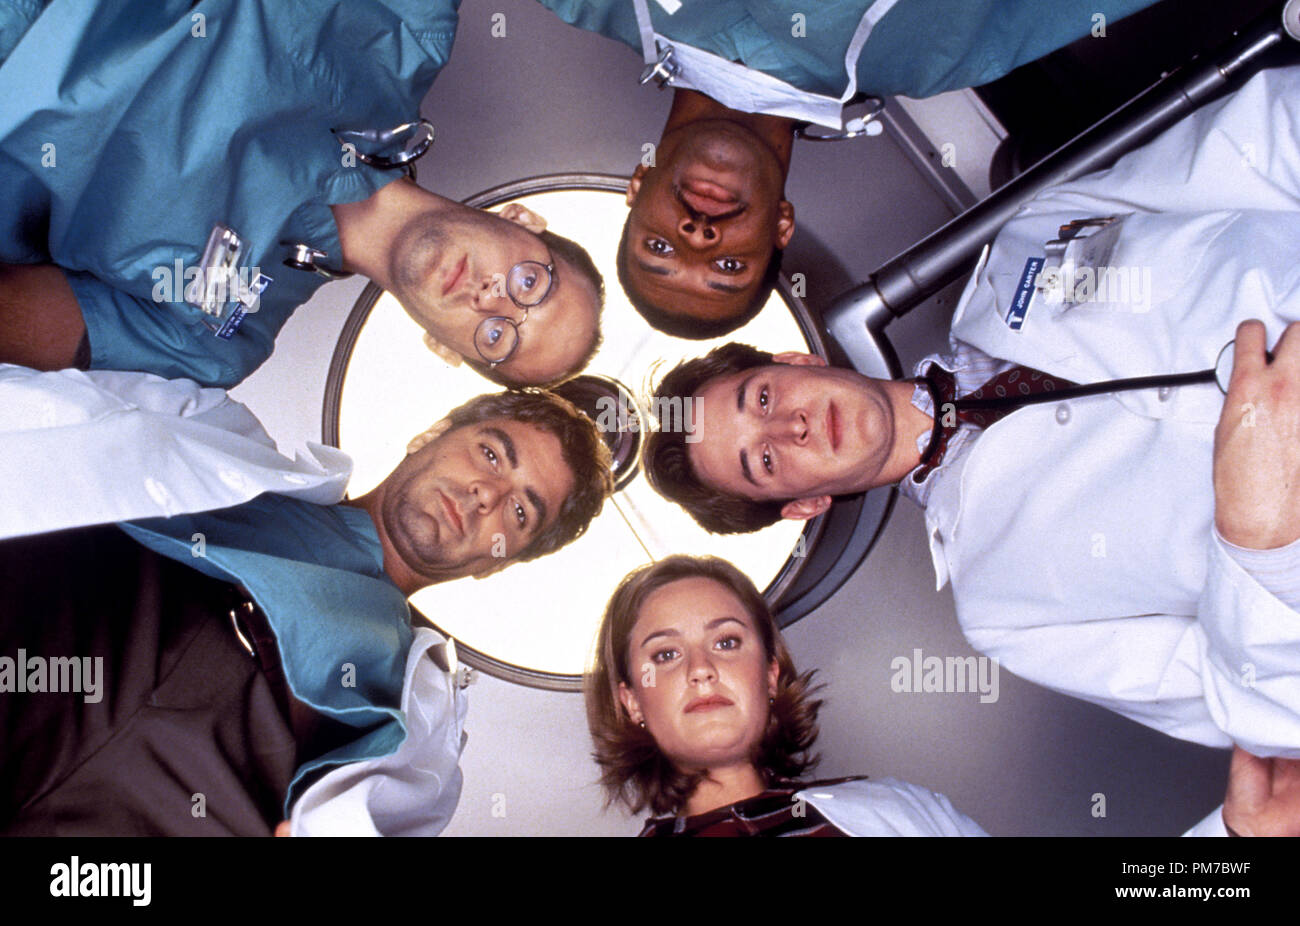 Film Still from 'ER' Noah Wyle, Sherry Stringfield, Anthony Edwards, George Clooney, Eriq La Salle 1995  File Reference # 31043427THA  For Editorial Use Only - All Rights Reserved Stock Photo